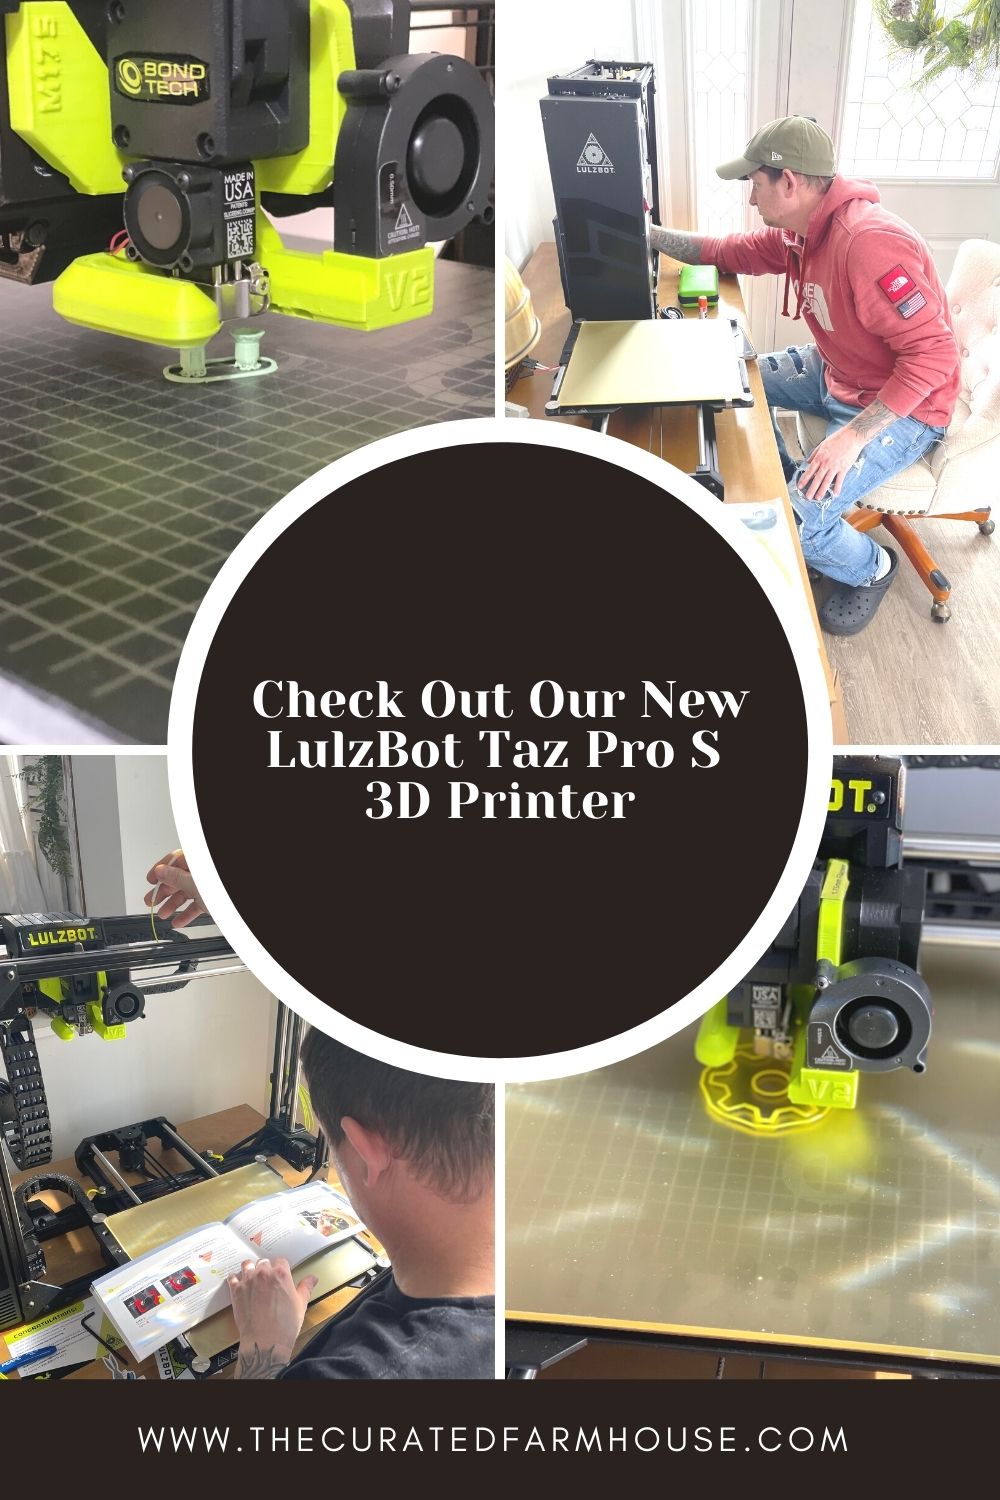 Check Out Our New LulzBot Taz Pro S 3D Printer